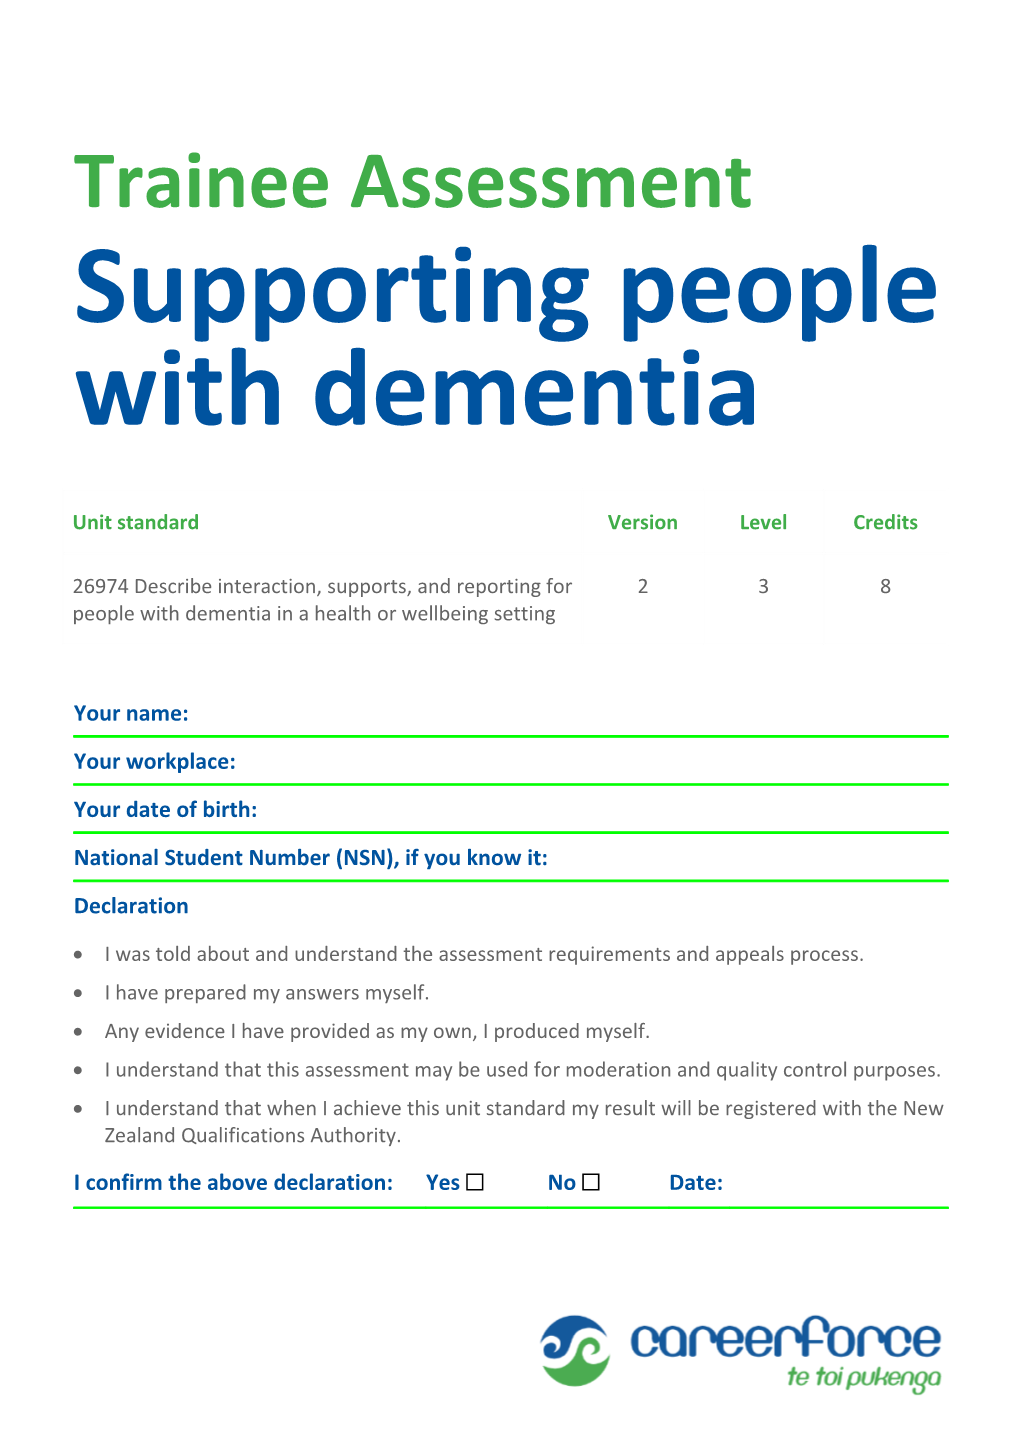 Supporting People with Dementia